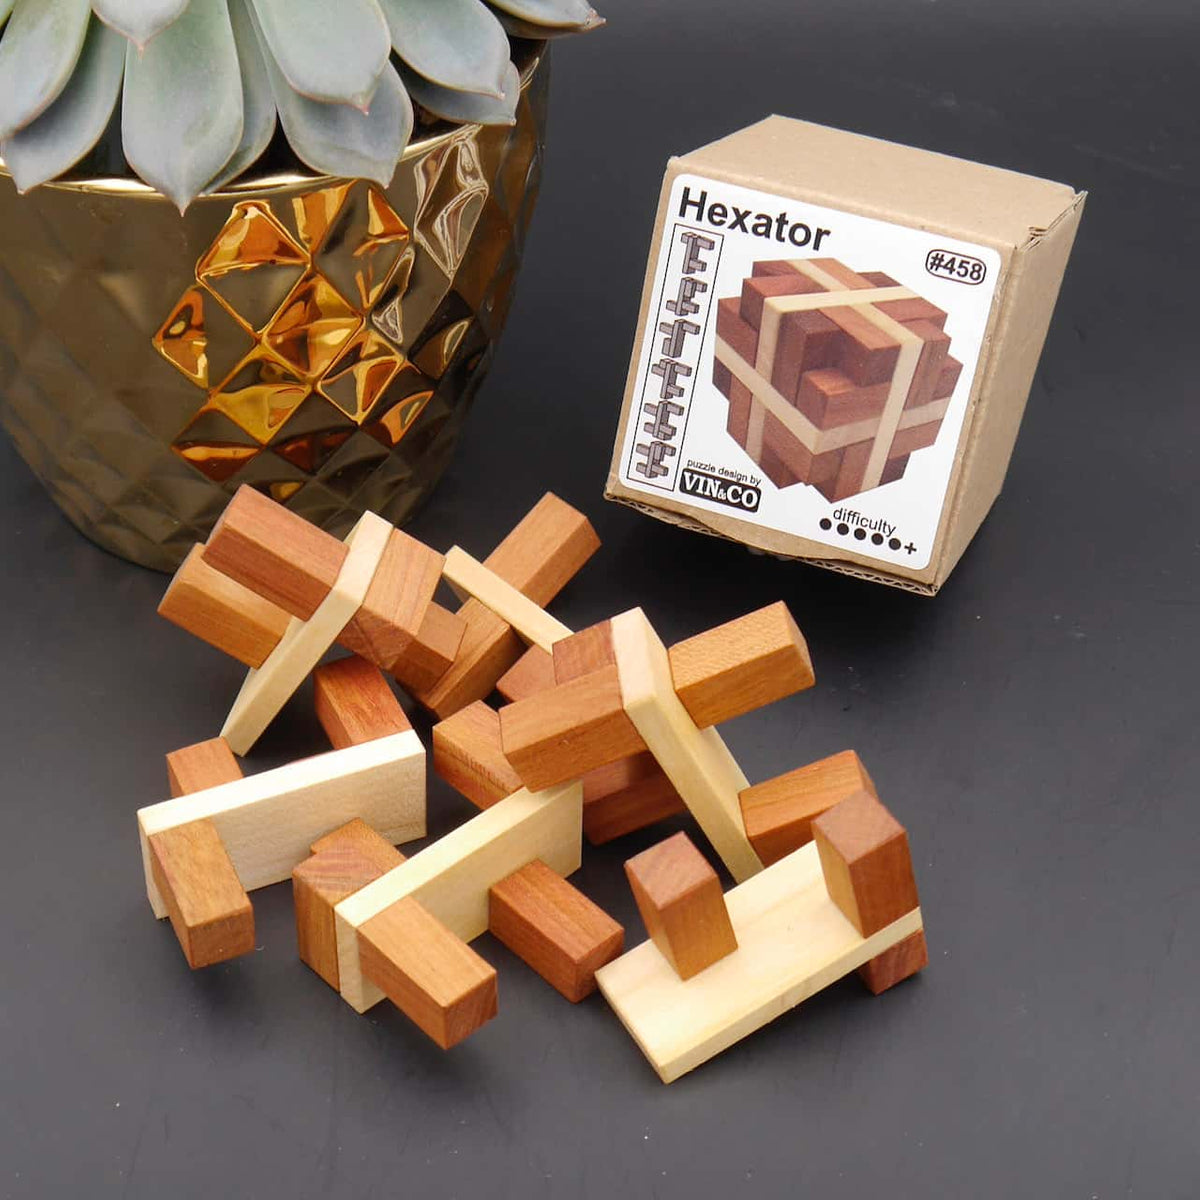 HEXATOR - herausforderndes Holzpuzzle